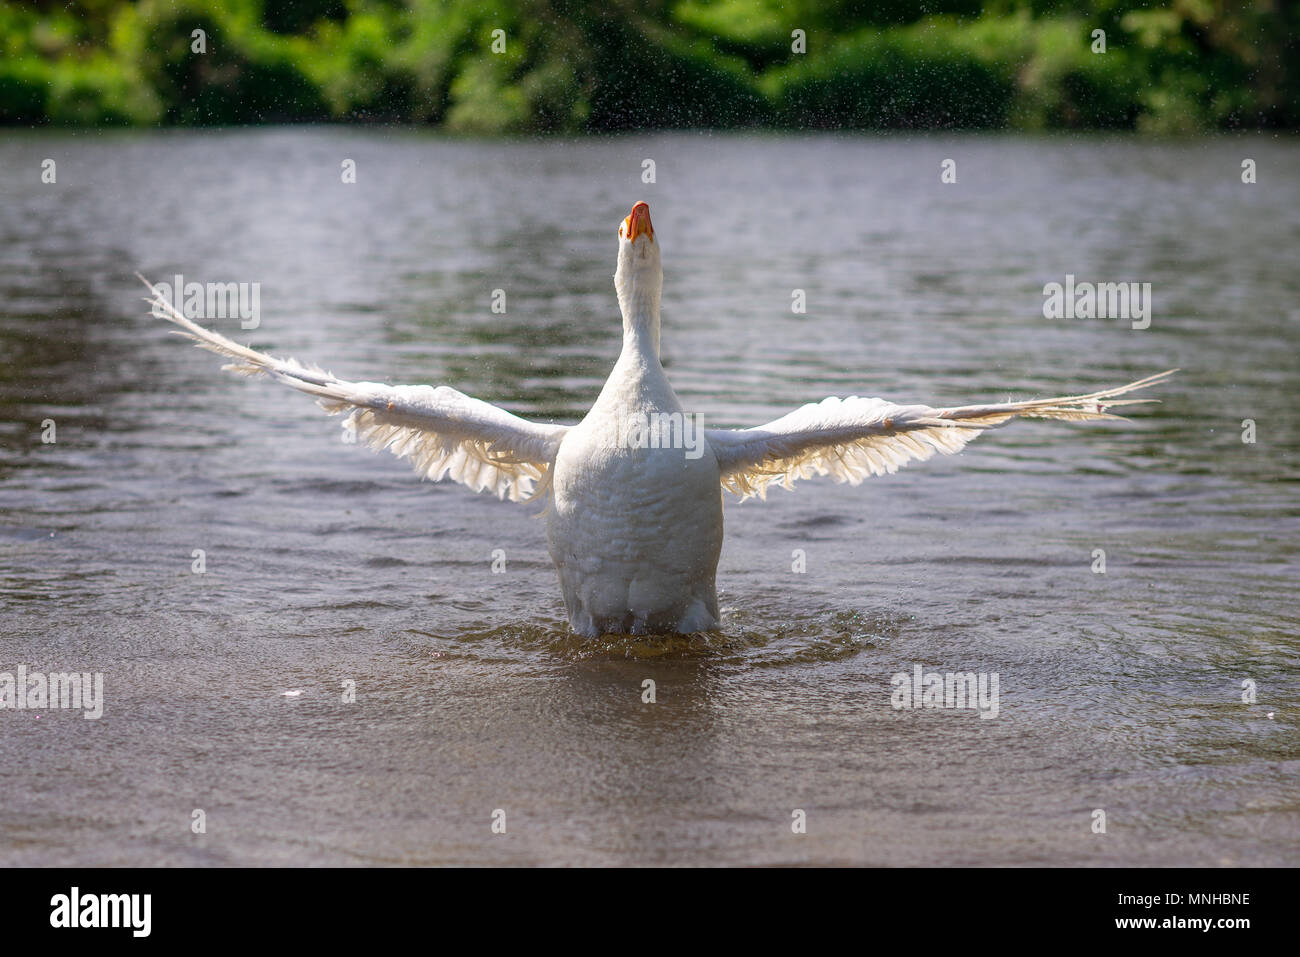 White greylag goose in a flap, flapping it's wings as it scrubs up in river water. Stock Photo